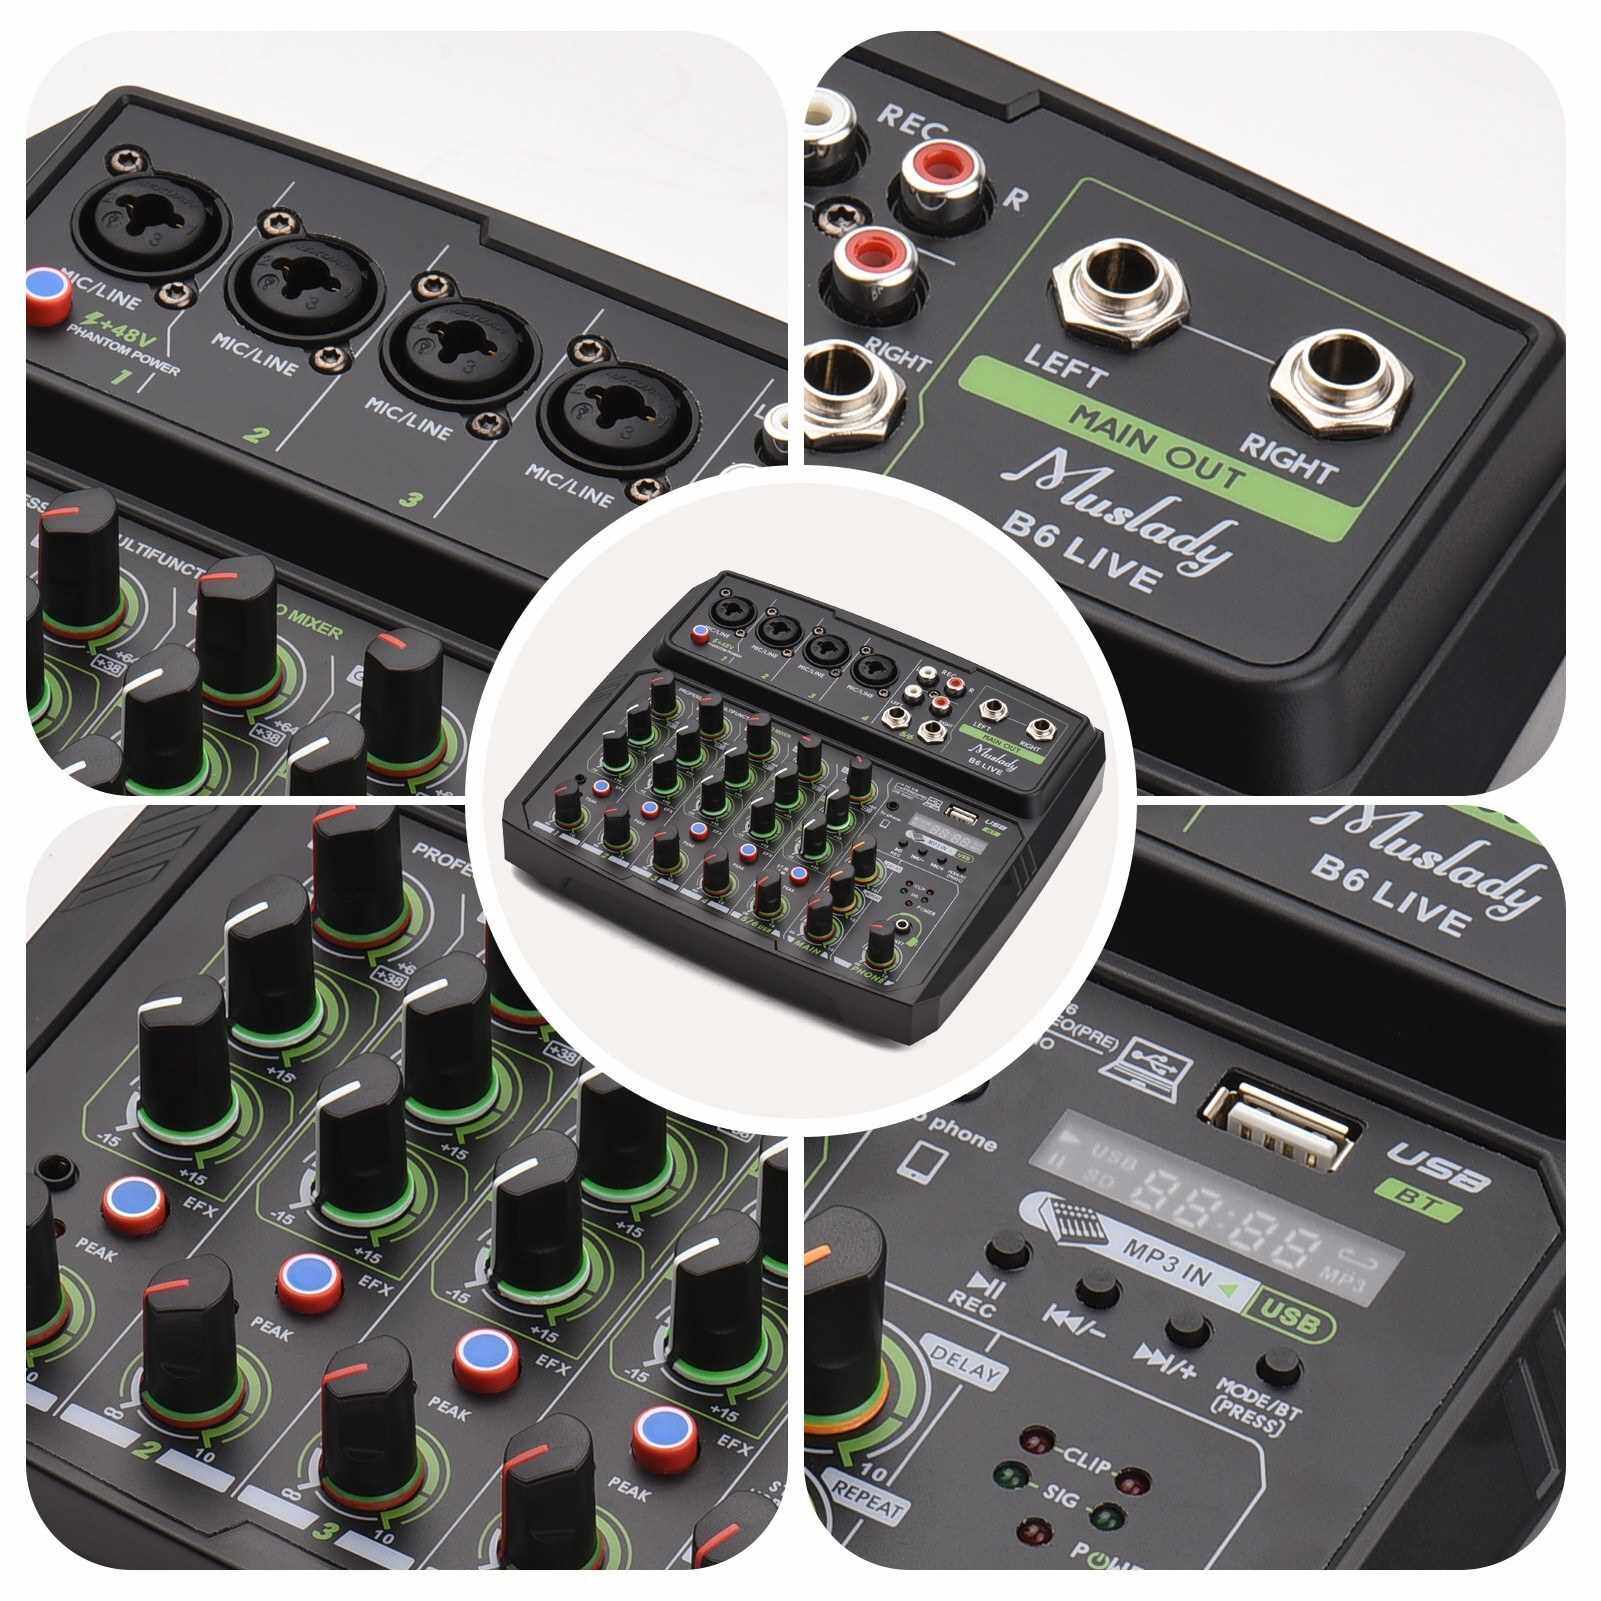 Muslady 6-Channel Audio Mixer Mixing Console LED Screen Built-in Soundcard USB BT Connection with 2-band EQ Gain Delay Repeat Control Record Live Broadcast Function with +48V Phantom Power for Karaoke Live Broadcast (Us)